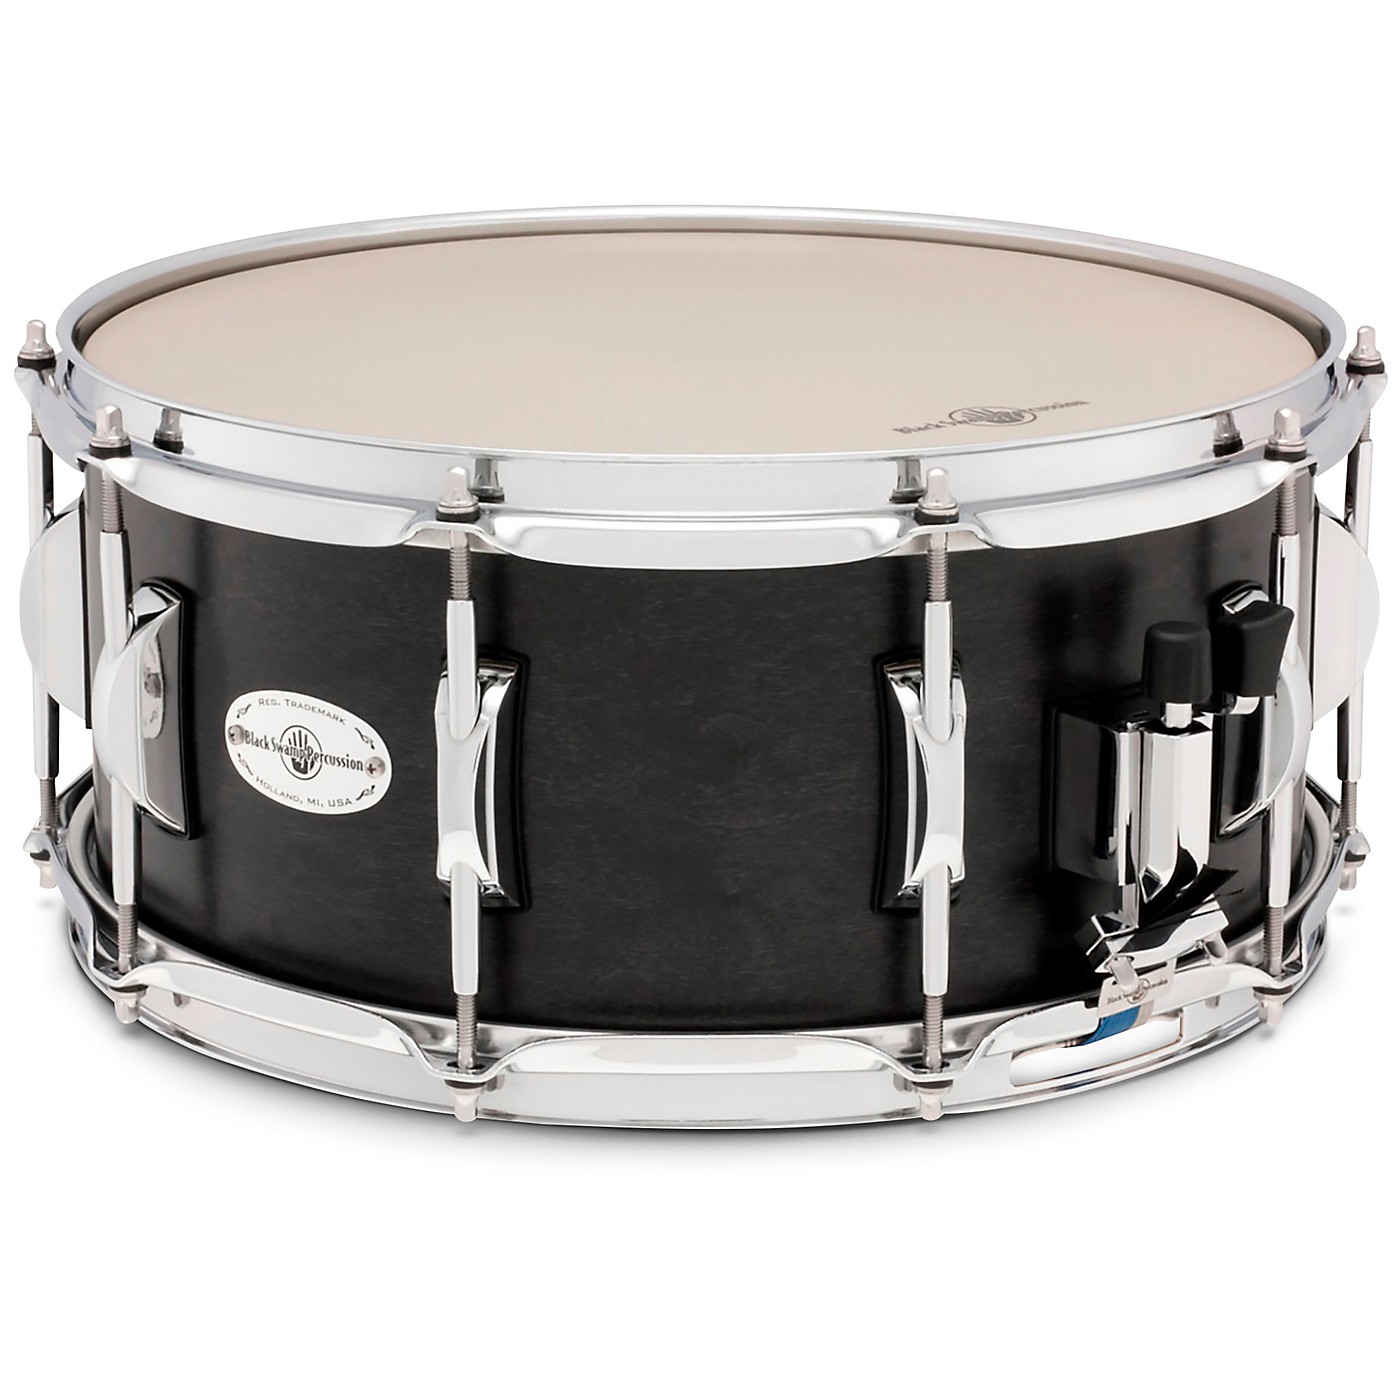 Black Swamp Percussion Concert Maple Shell Snare Drum thumbnail